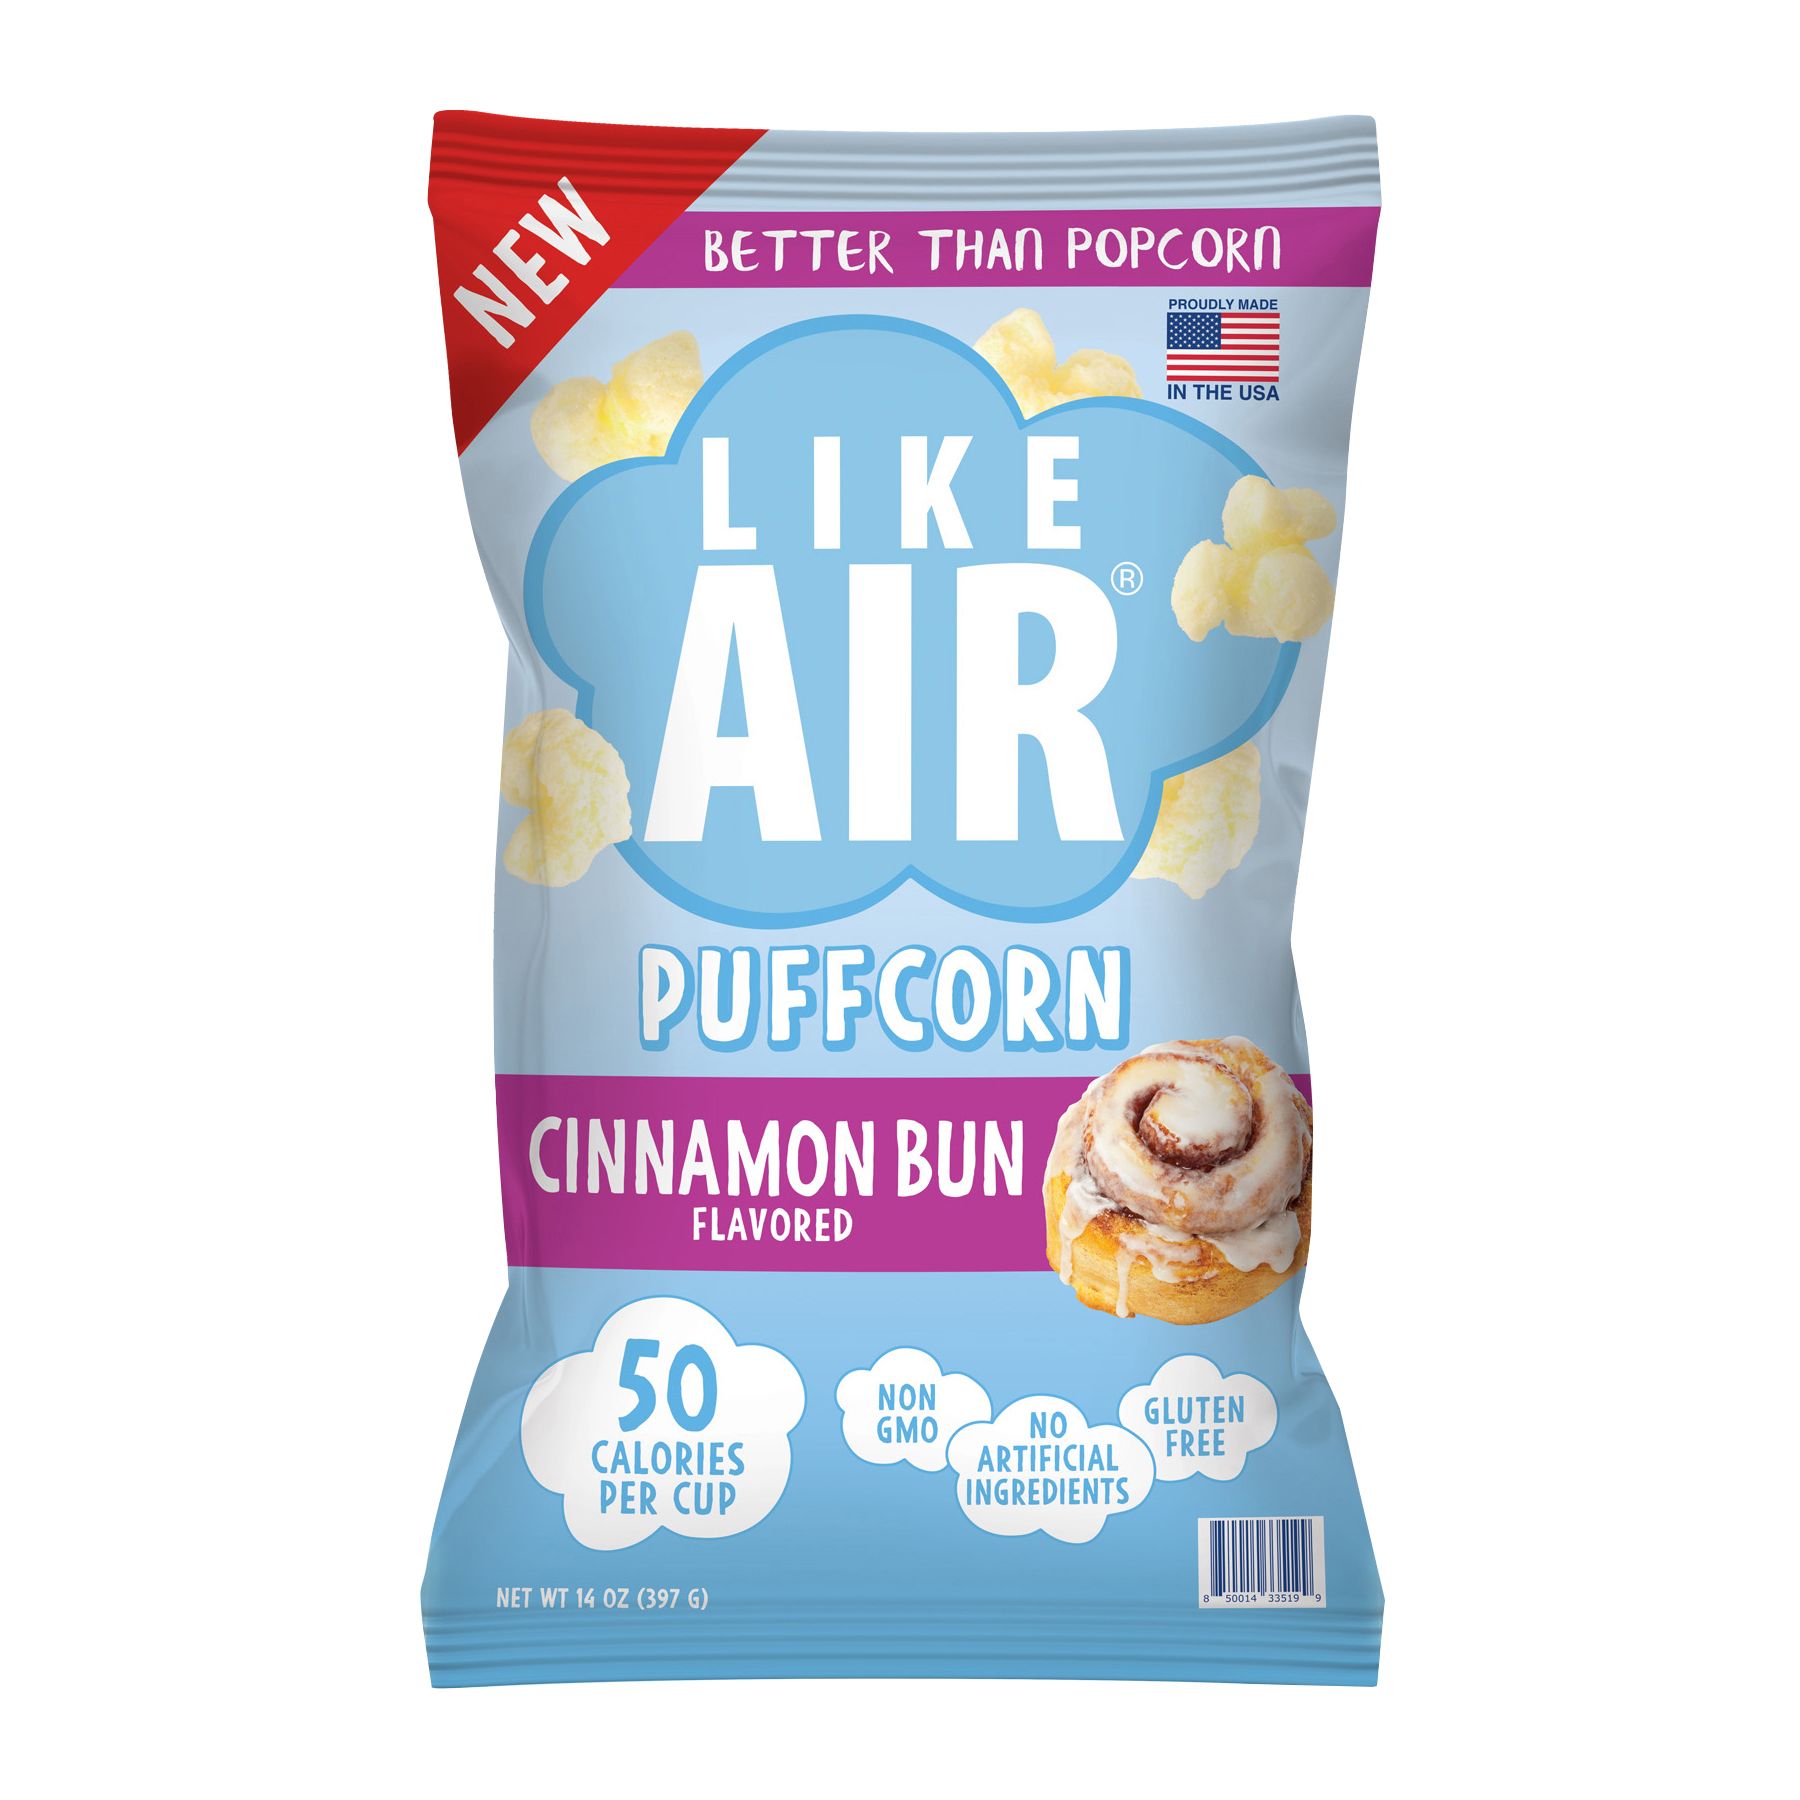 Like Air Puffcorn (@likeairsnacks) • Instagram photos and videos